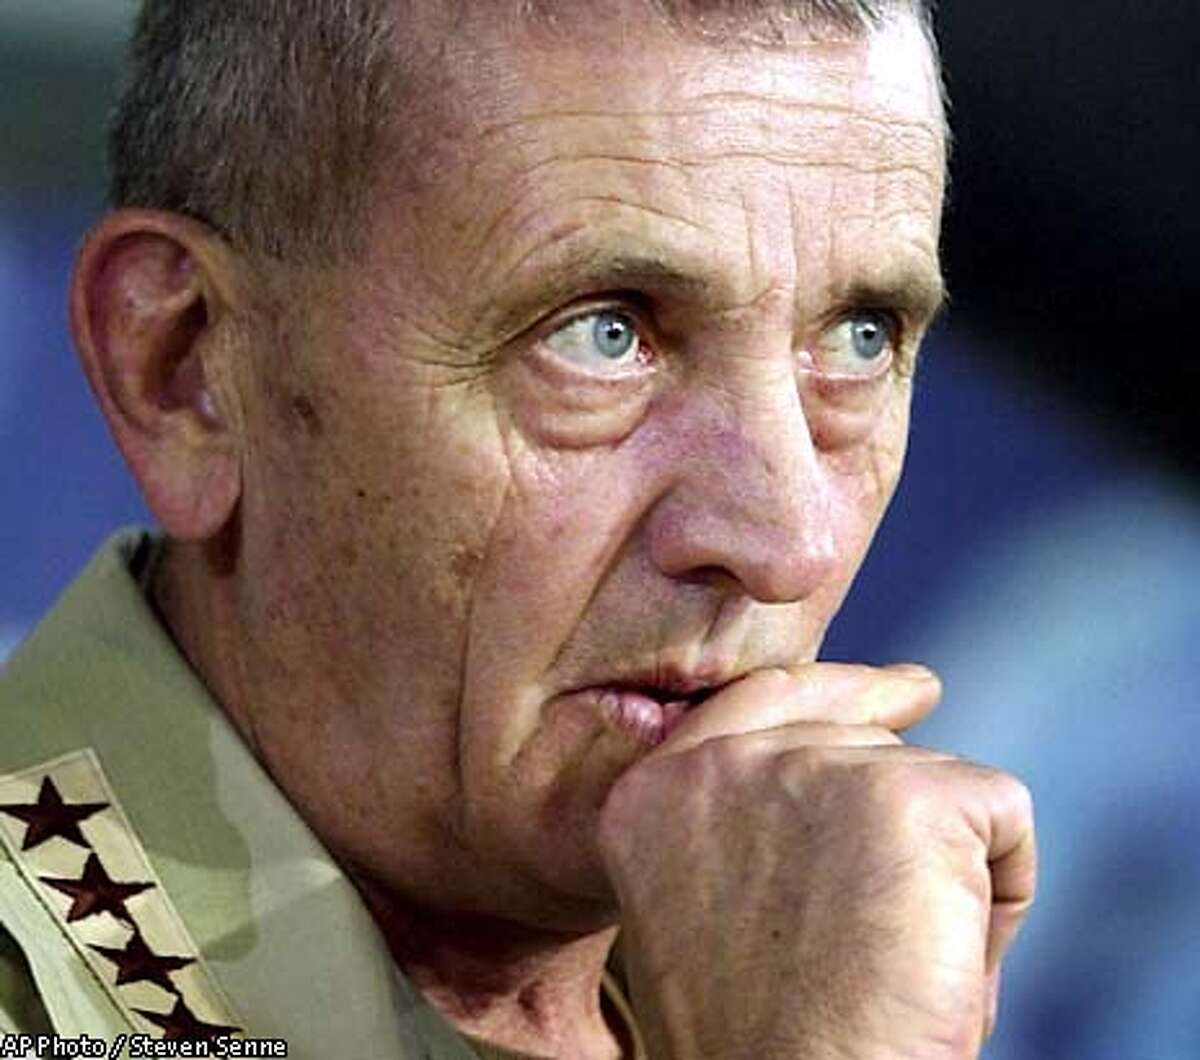 Gen. Tommy Franks, Commander of U.S. Central Command, listens to a question during a news conference at the Coalition Media Center, at Camp As Sayliyah, in Doha, Qatar, Saturday, March 22, 2003. Franks spoke about the progress in the war on Iraq. (AP Photo / Steven Senne)